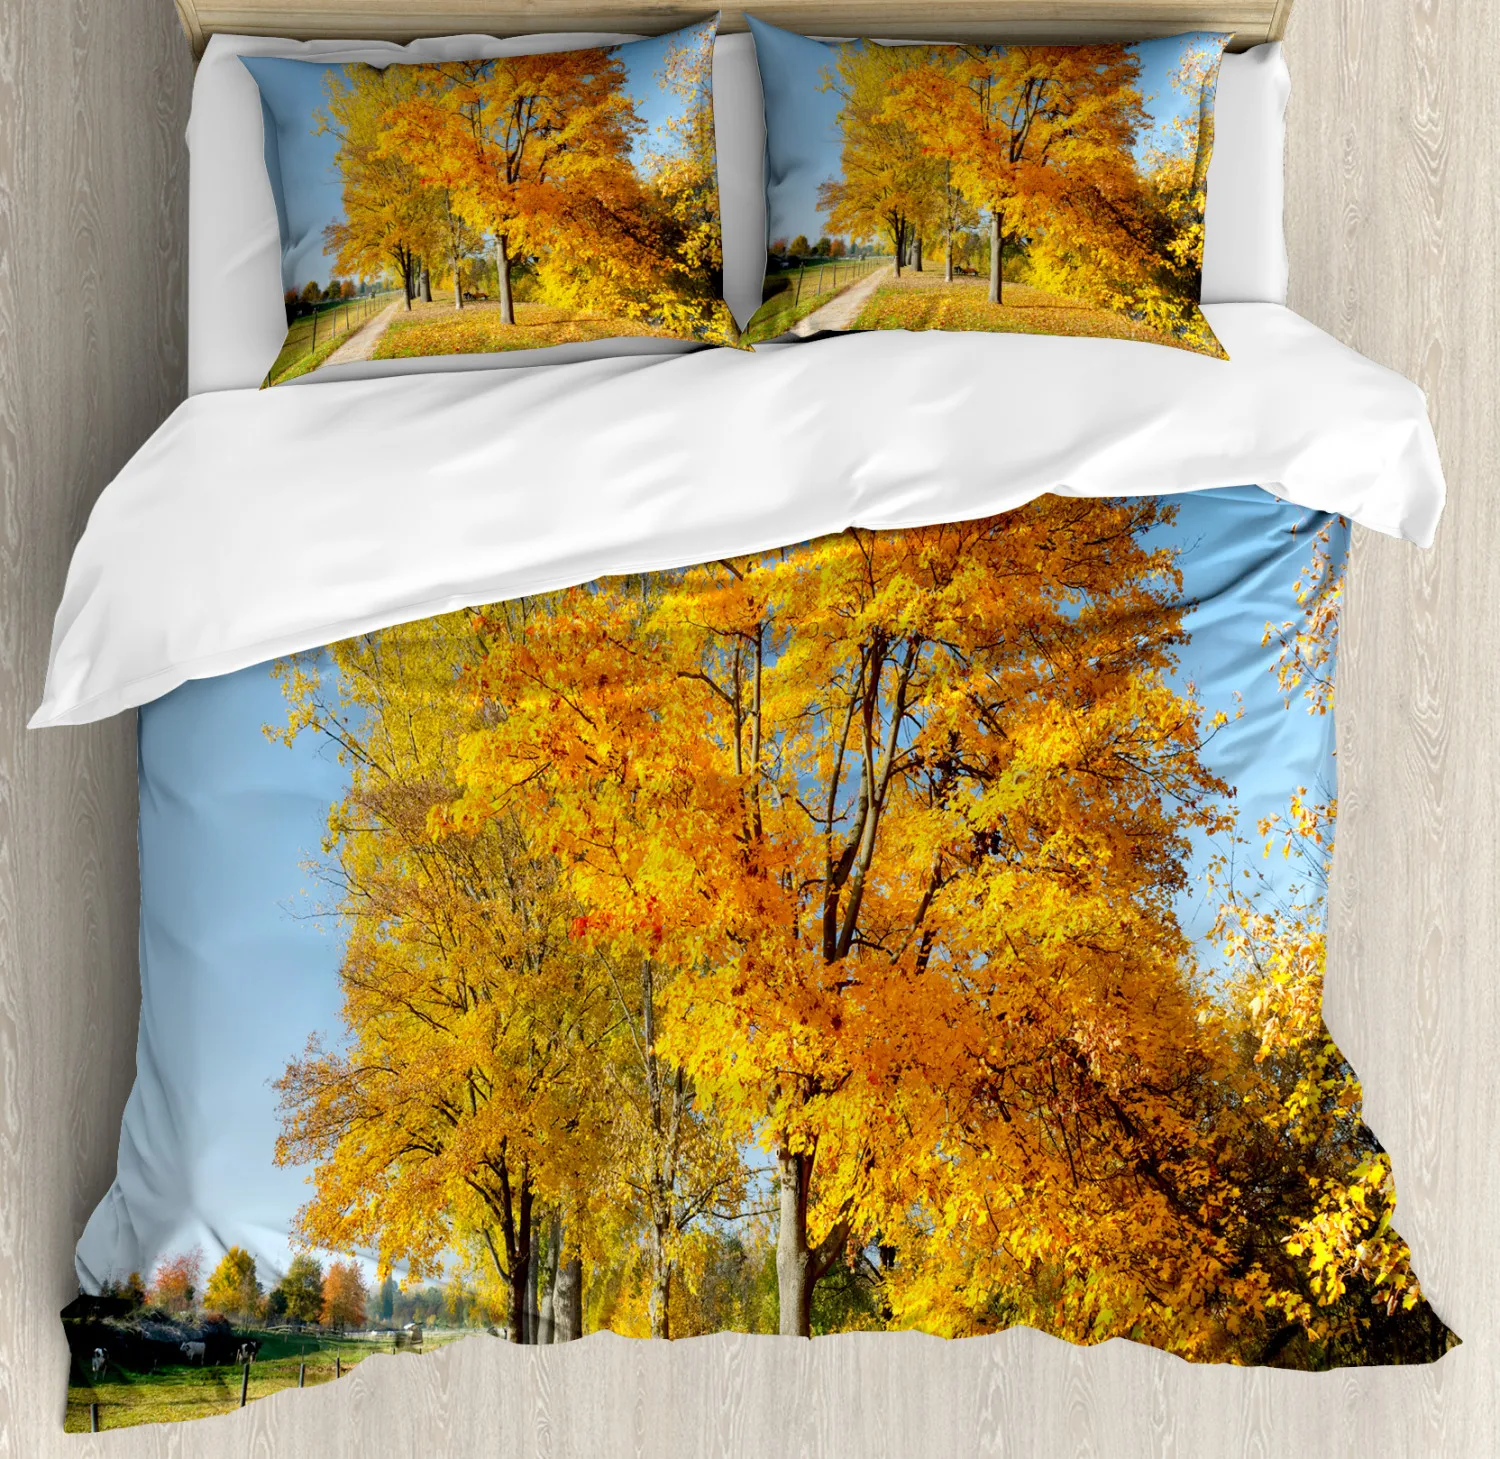 

Fall Duvet Cover Set,Canadian Maple Tree Leaves In Autumn Season Nature Plant Polyester Quilt Cover King/Queen/Full/Twin Size